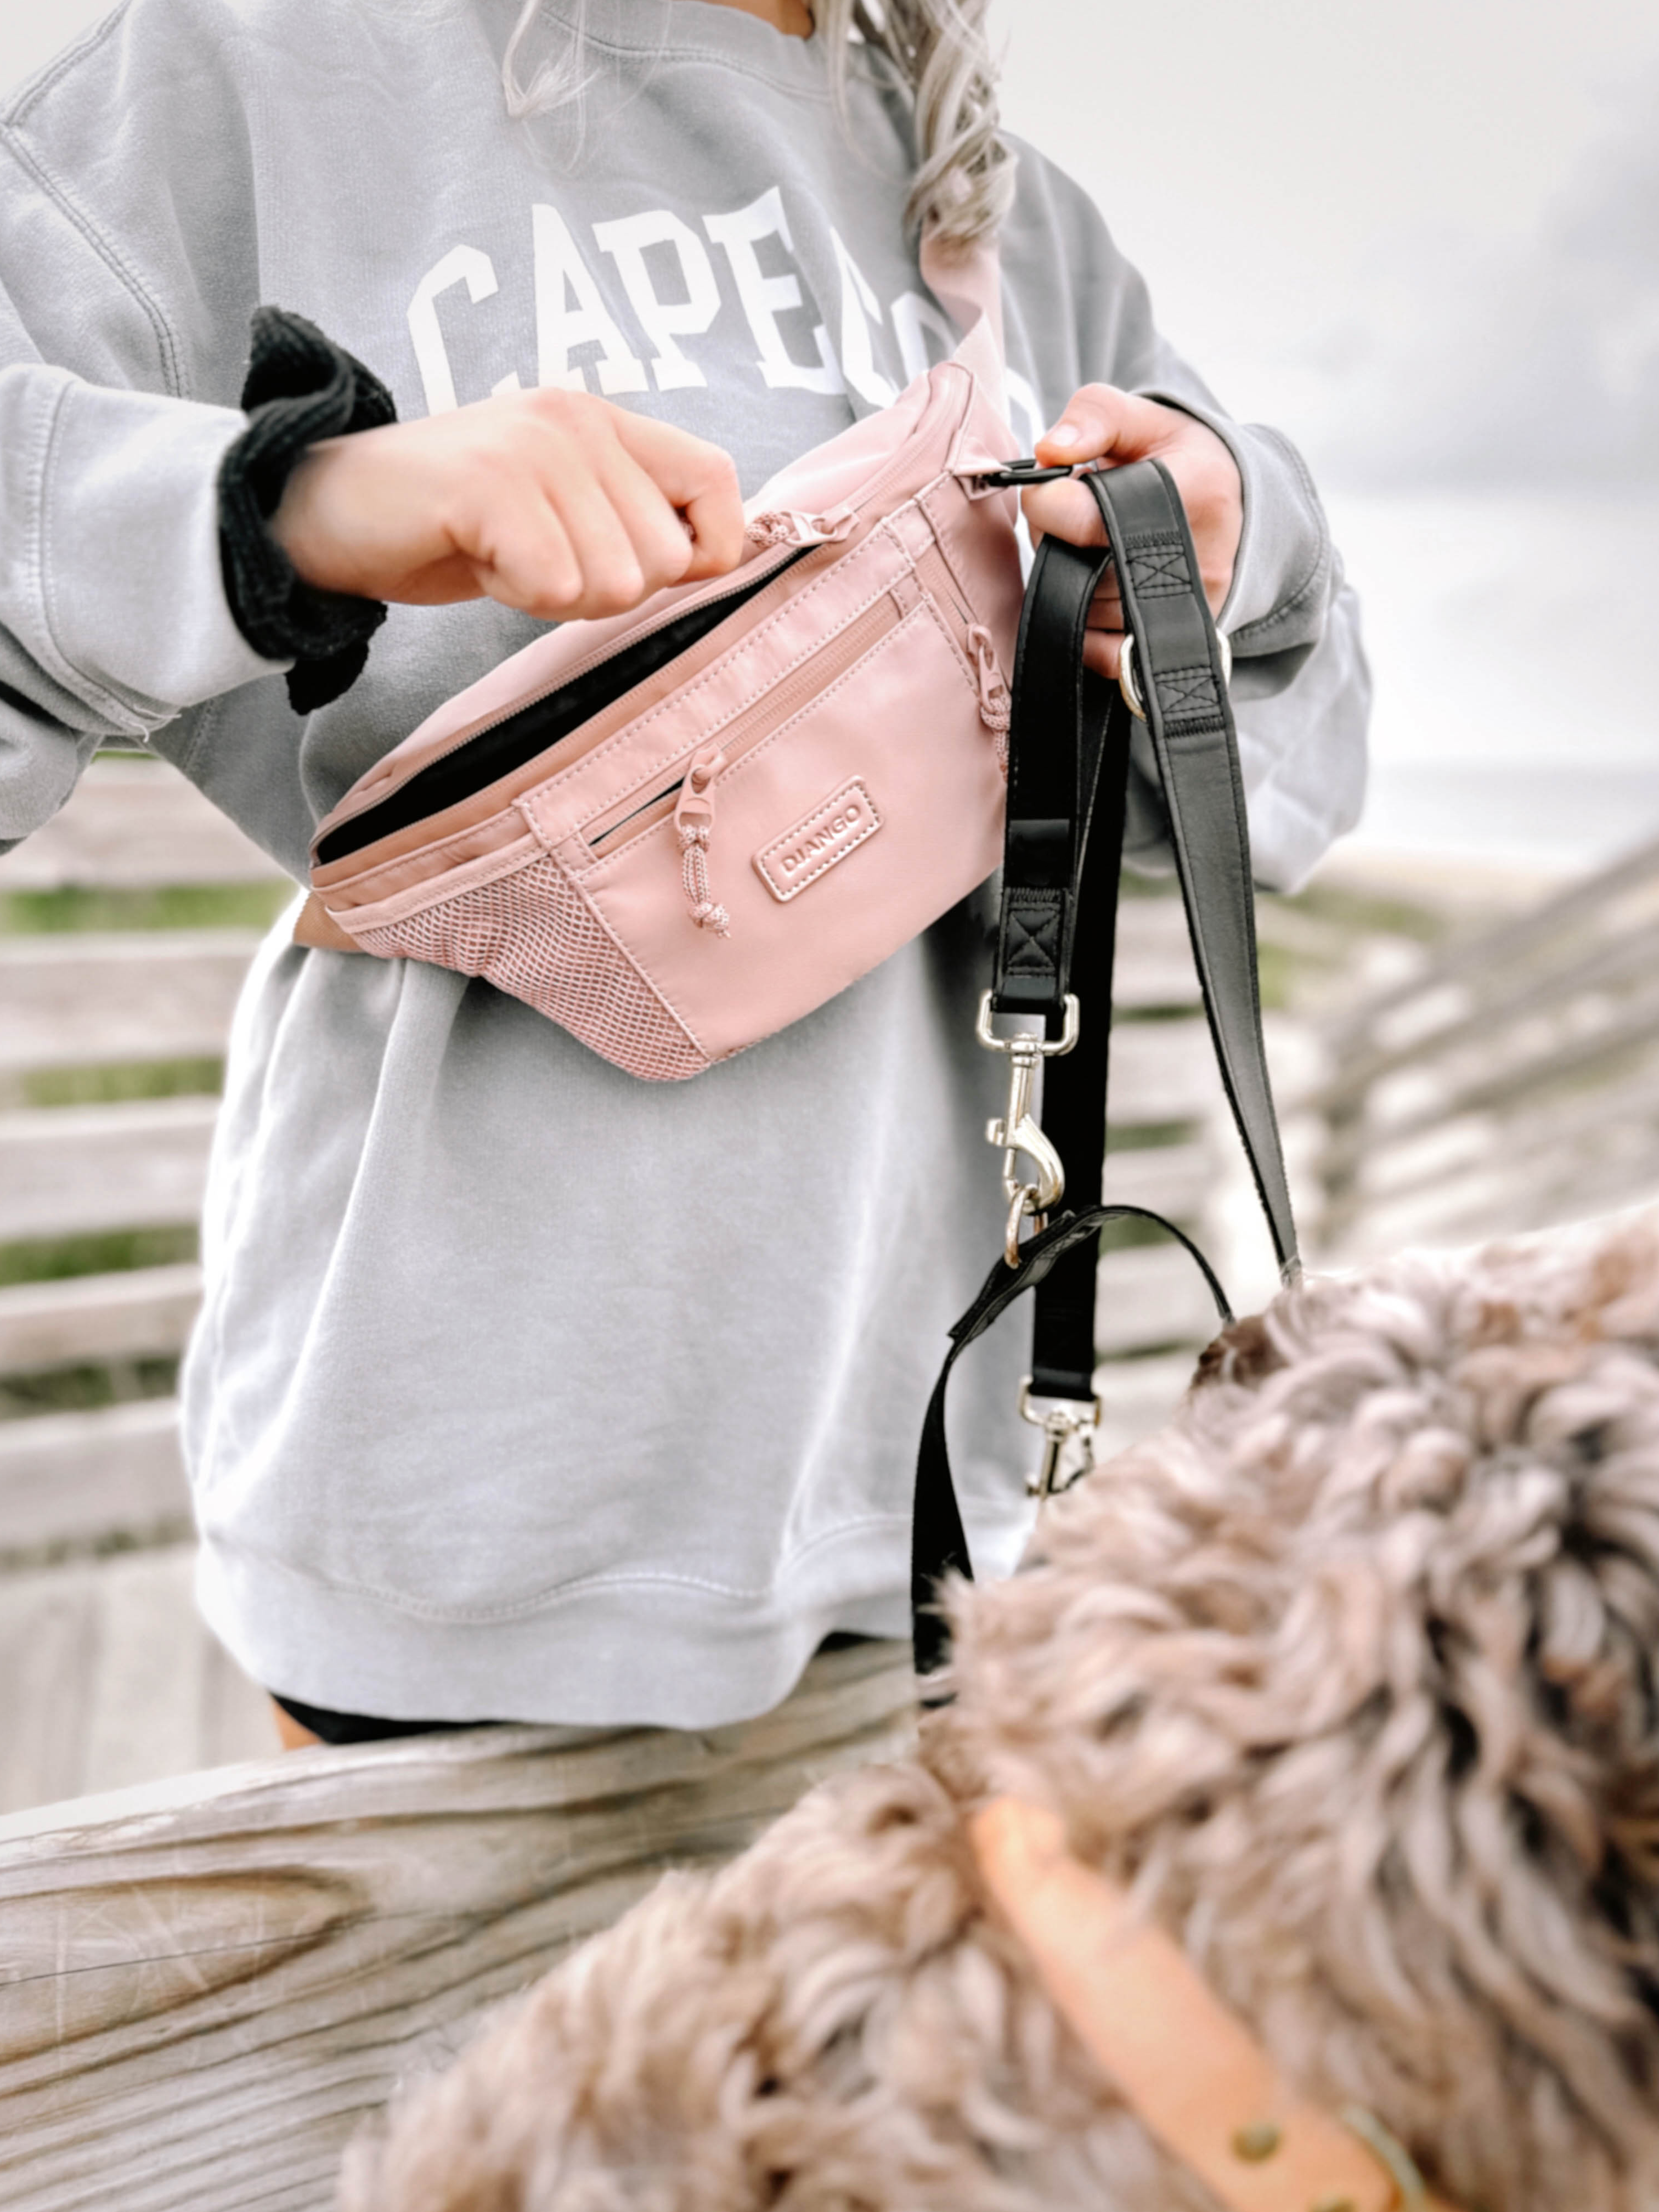 DJANGO's Nolita Belt Bag is a modern and ultra-functional essential for dog lovers, travelers, and explorers. The sleek and stylish fanny pack features a water-resistant exterior, spacious main compartment, and multiple interior and exterior zipper pockets for safe stashing. - djangobrand.com